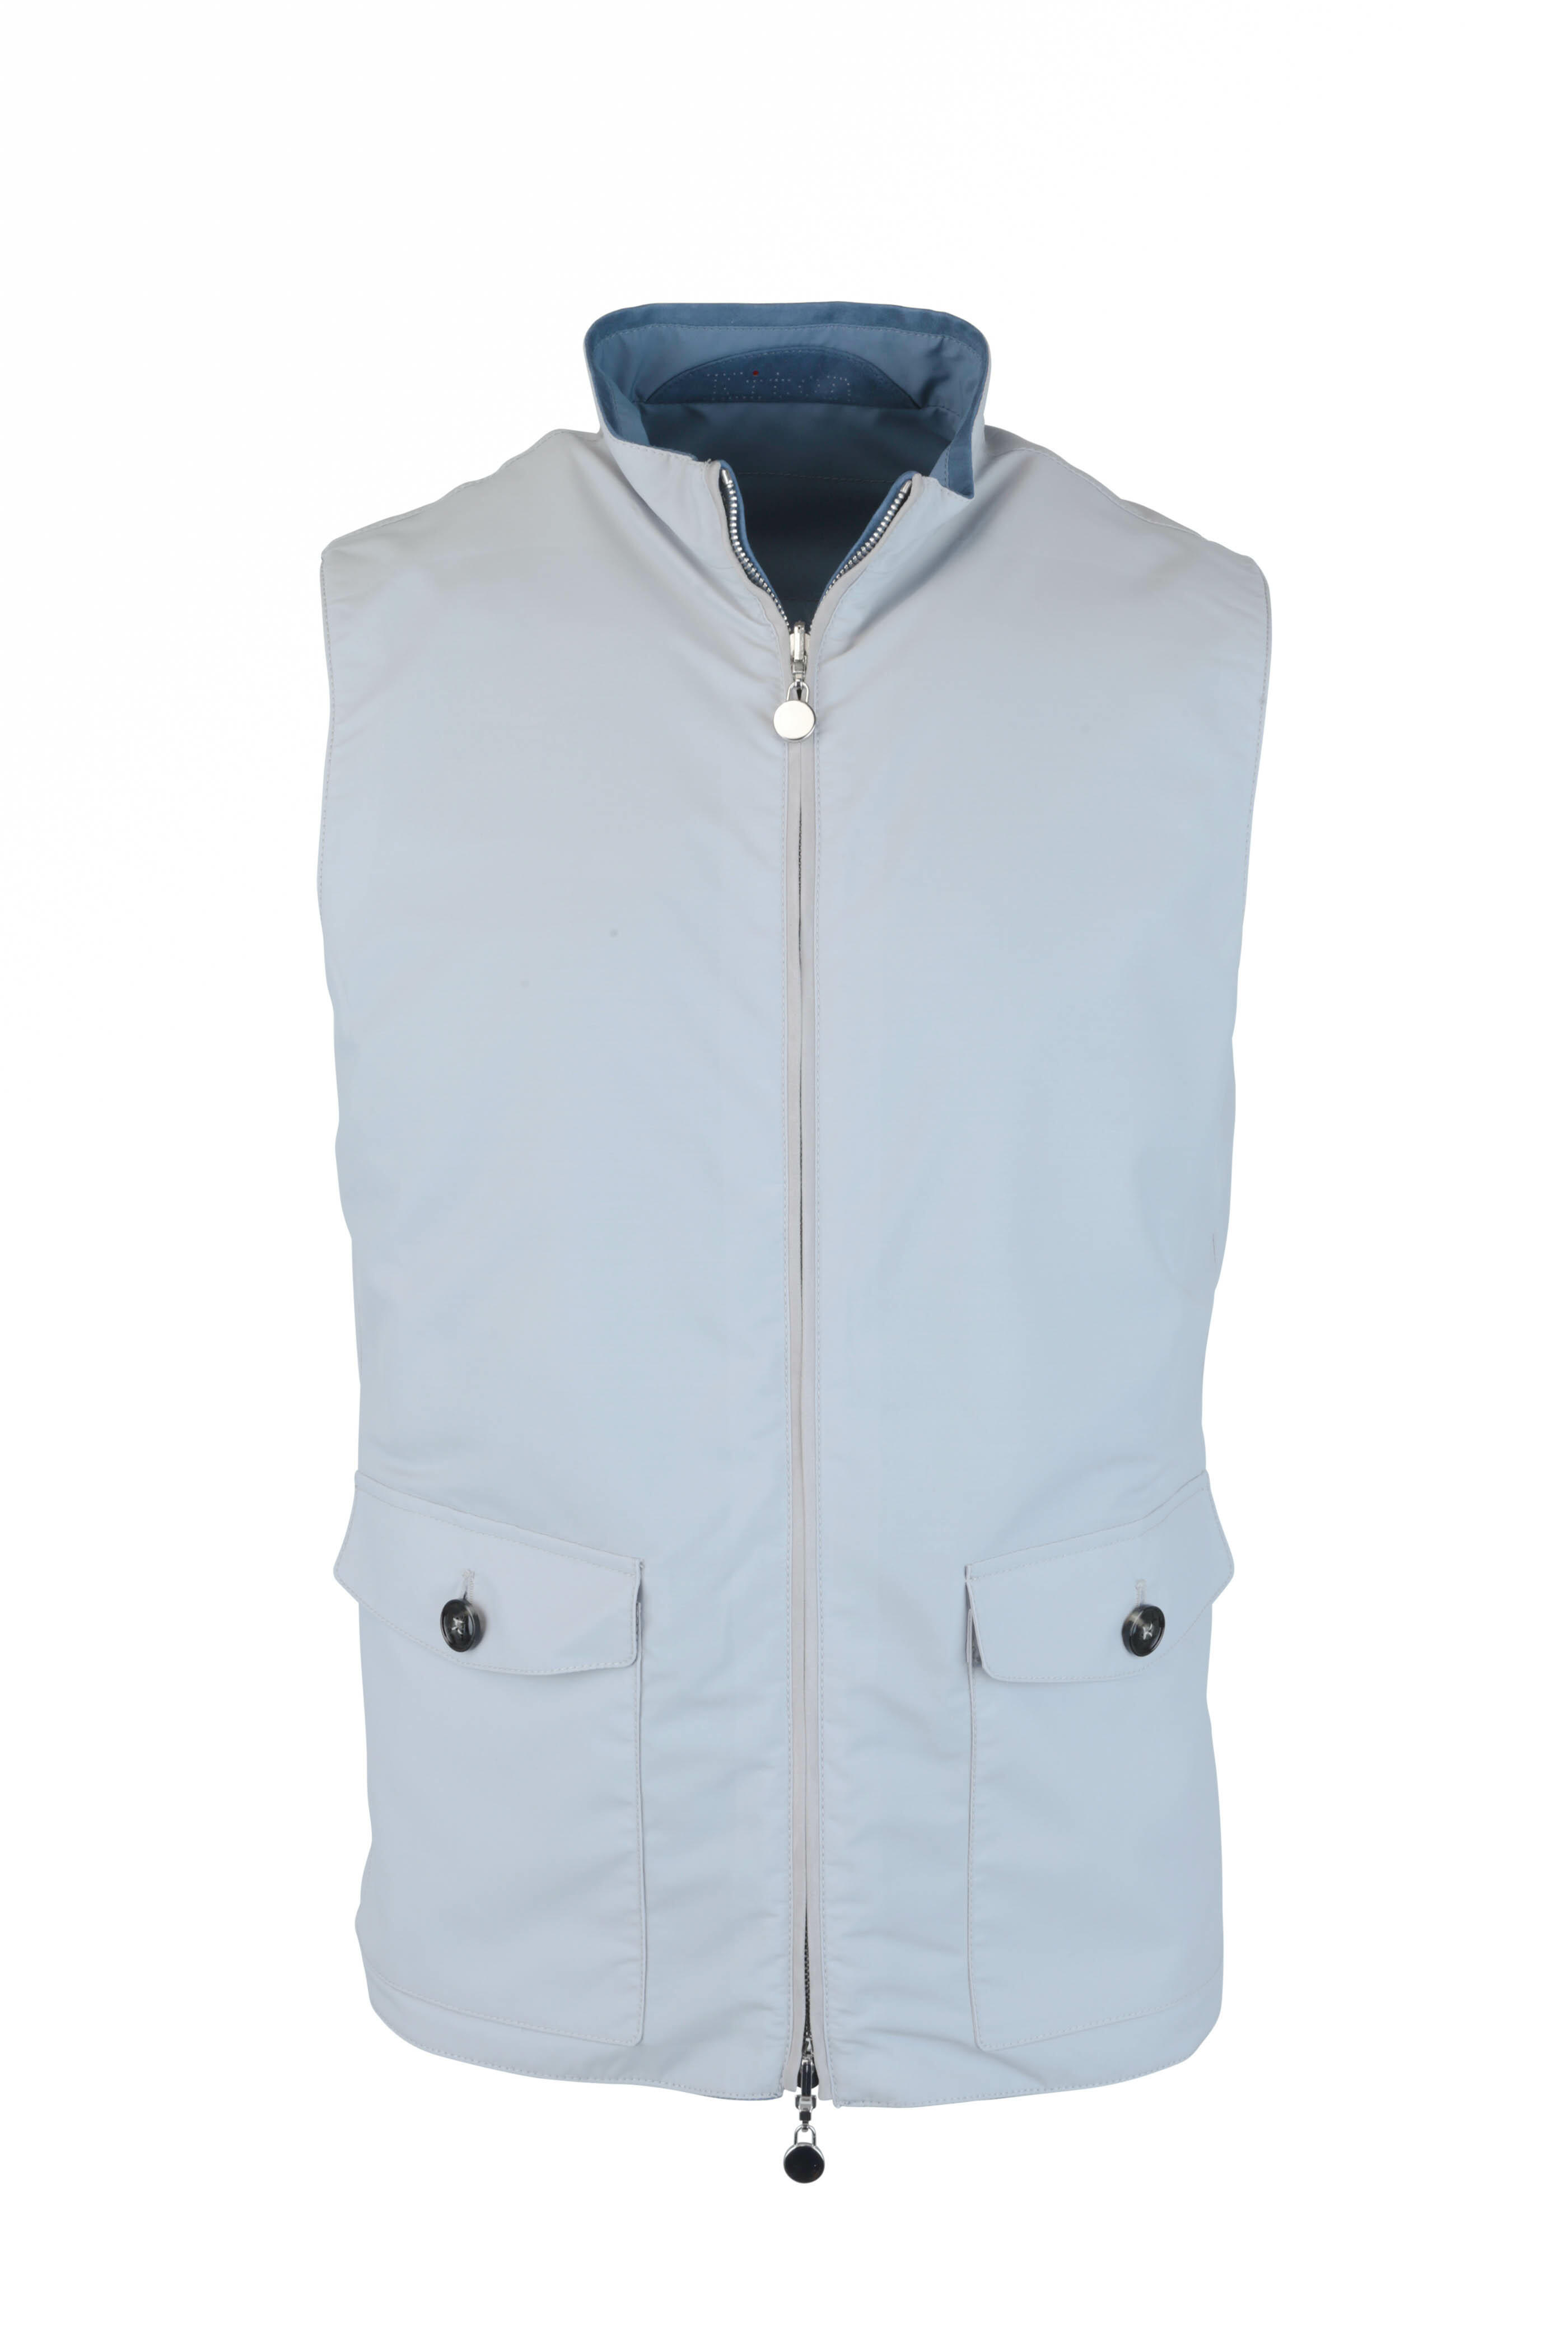 Kiton - Blue & Gray Reversible Wool Blend Vest | Mitchell Stores